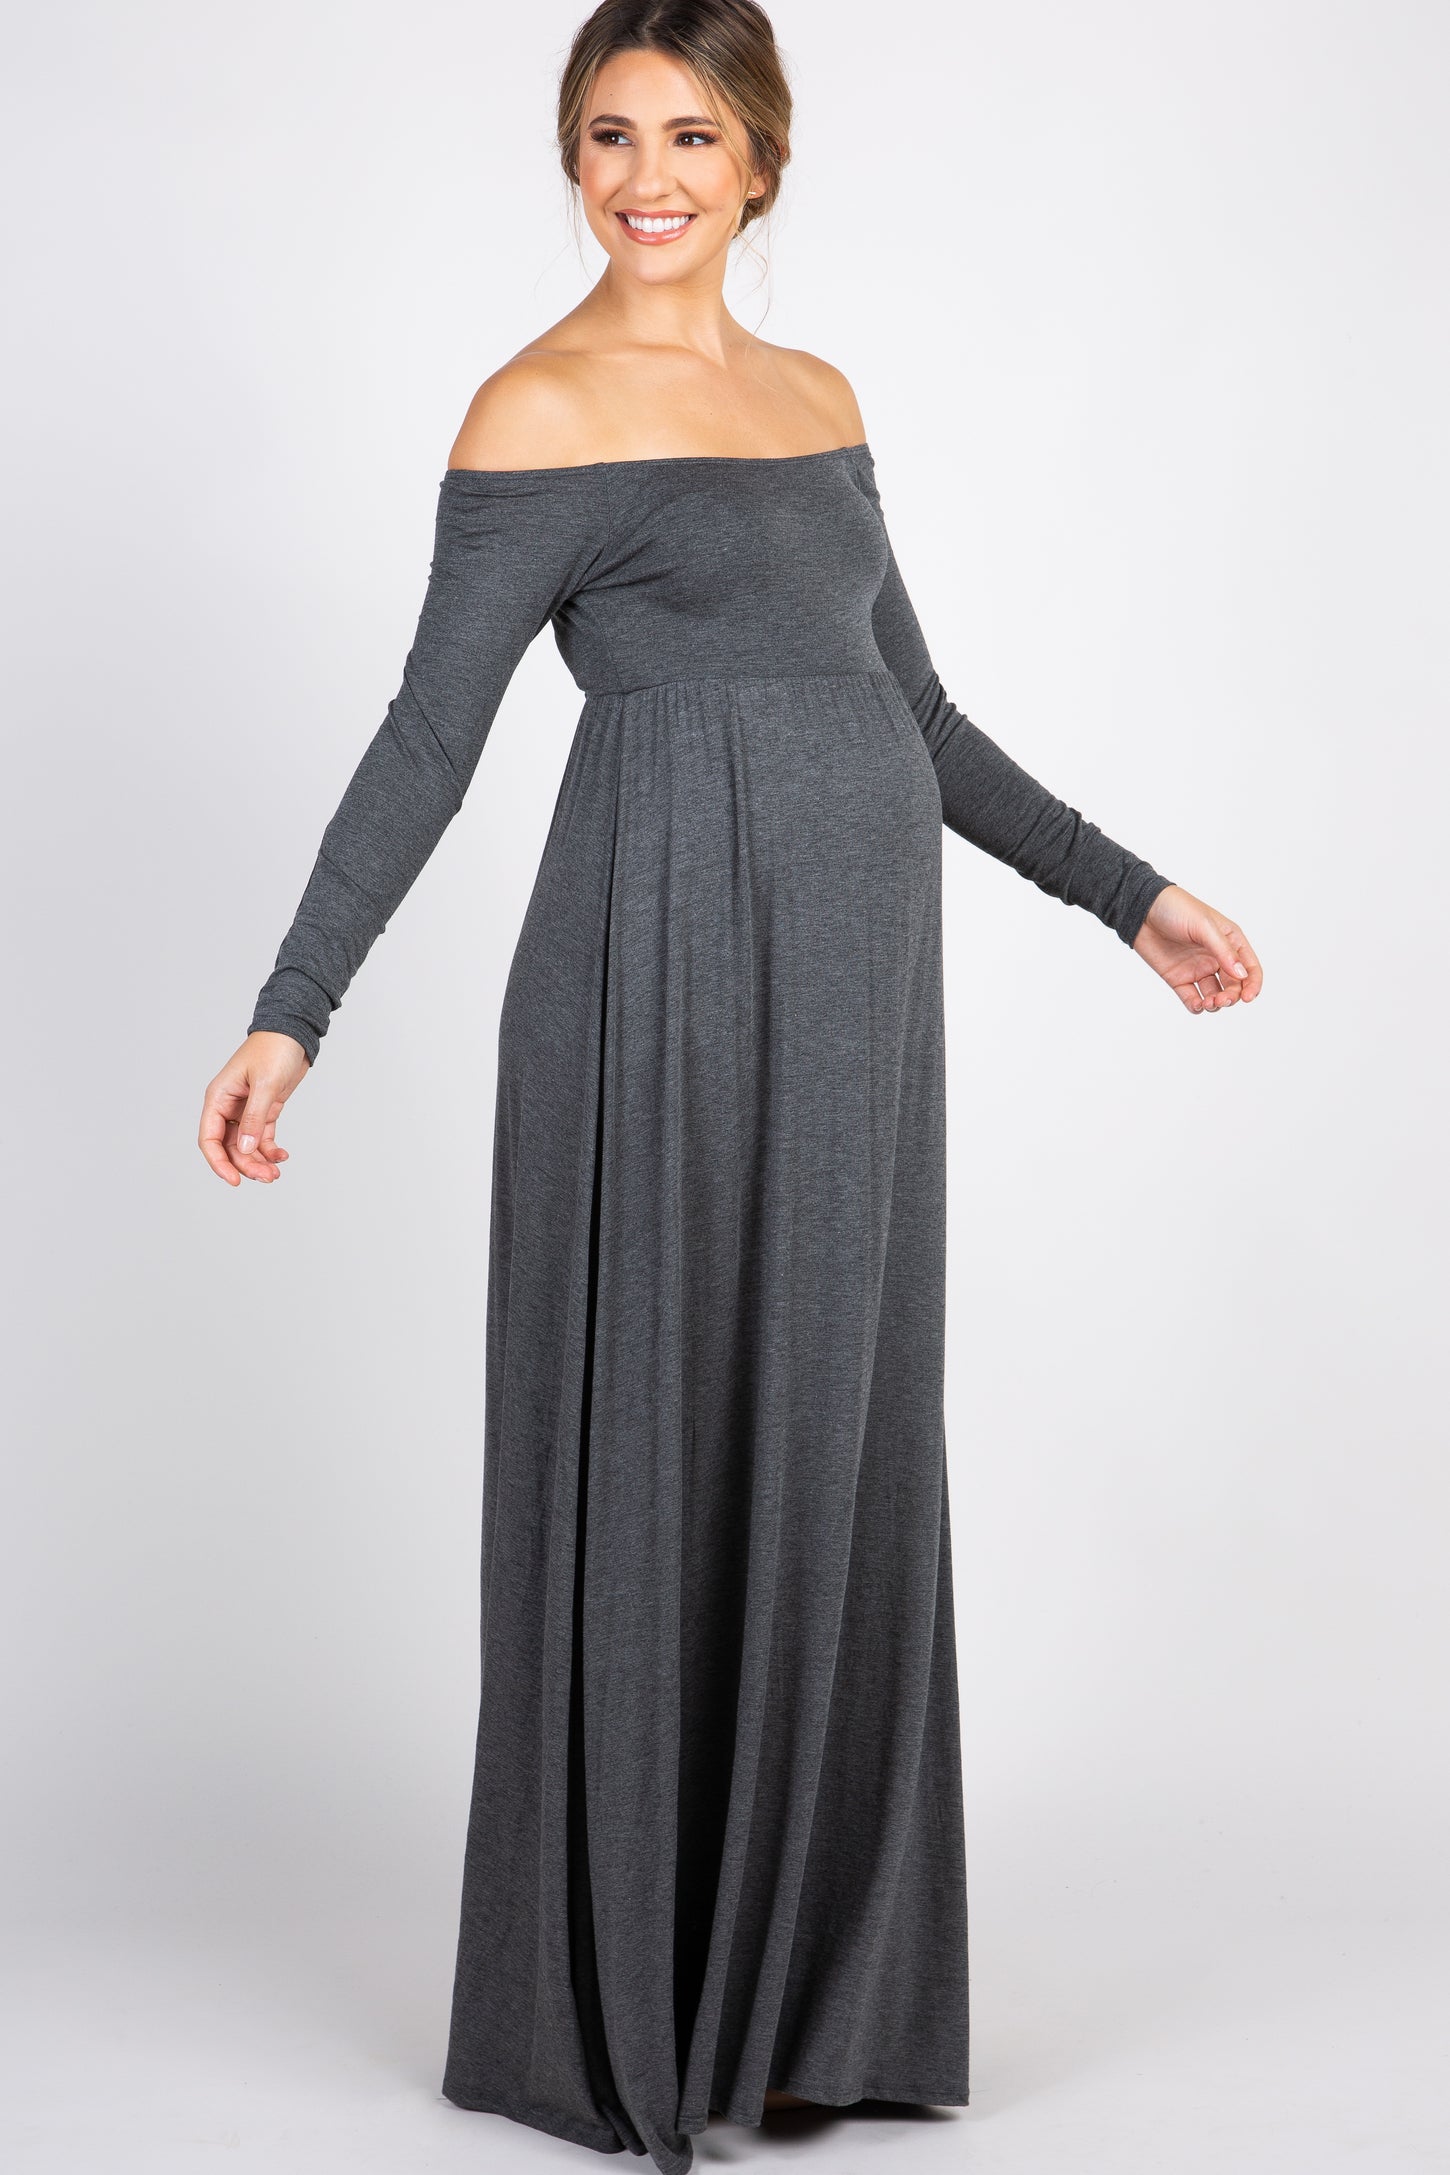 PinkBlush Charcoal Solid Off Shoulder Maternity Maxi Dress